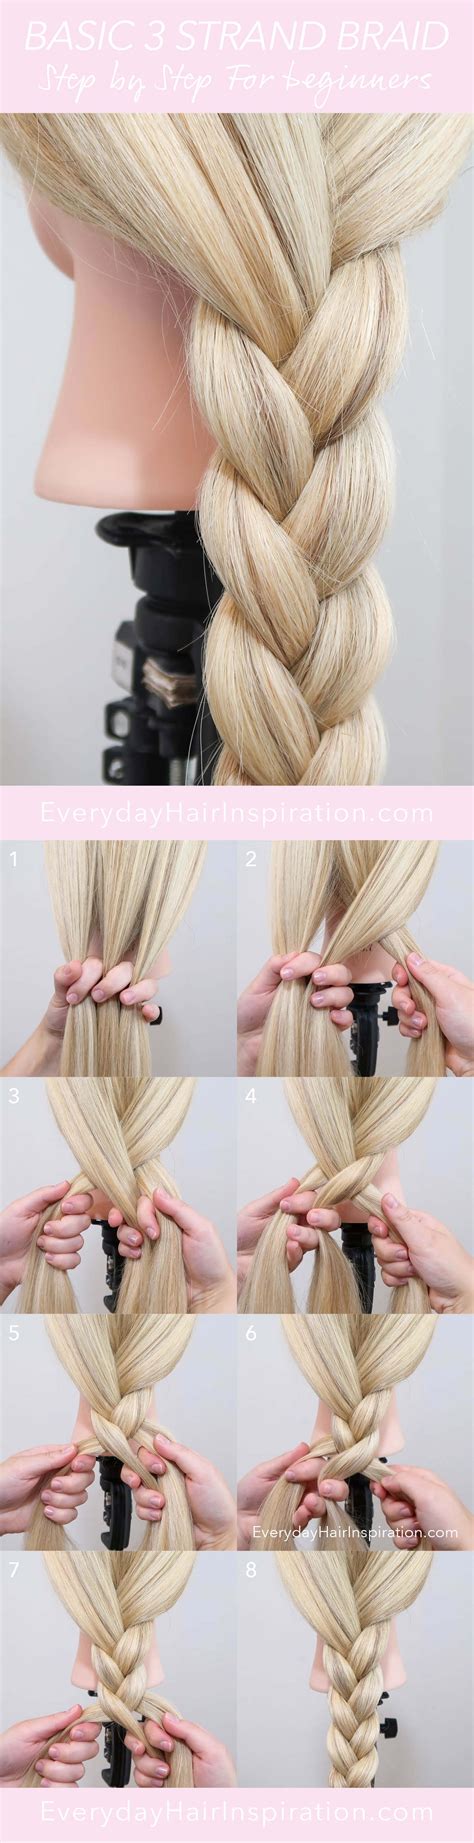 Learn how to braid hair with this comprehensive guide for beginners. Find out how to do simple, French, Dutch, box and men's braids, and get tips on how to prep, style and maintain your braids.